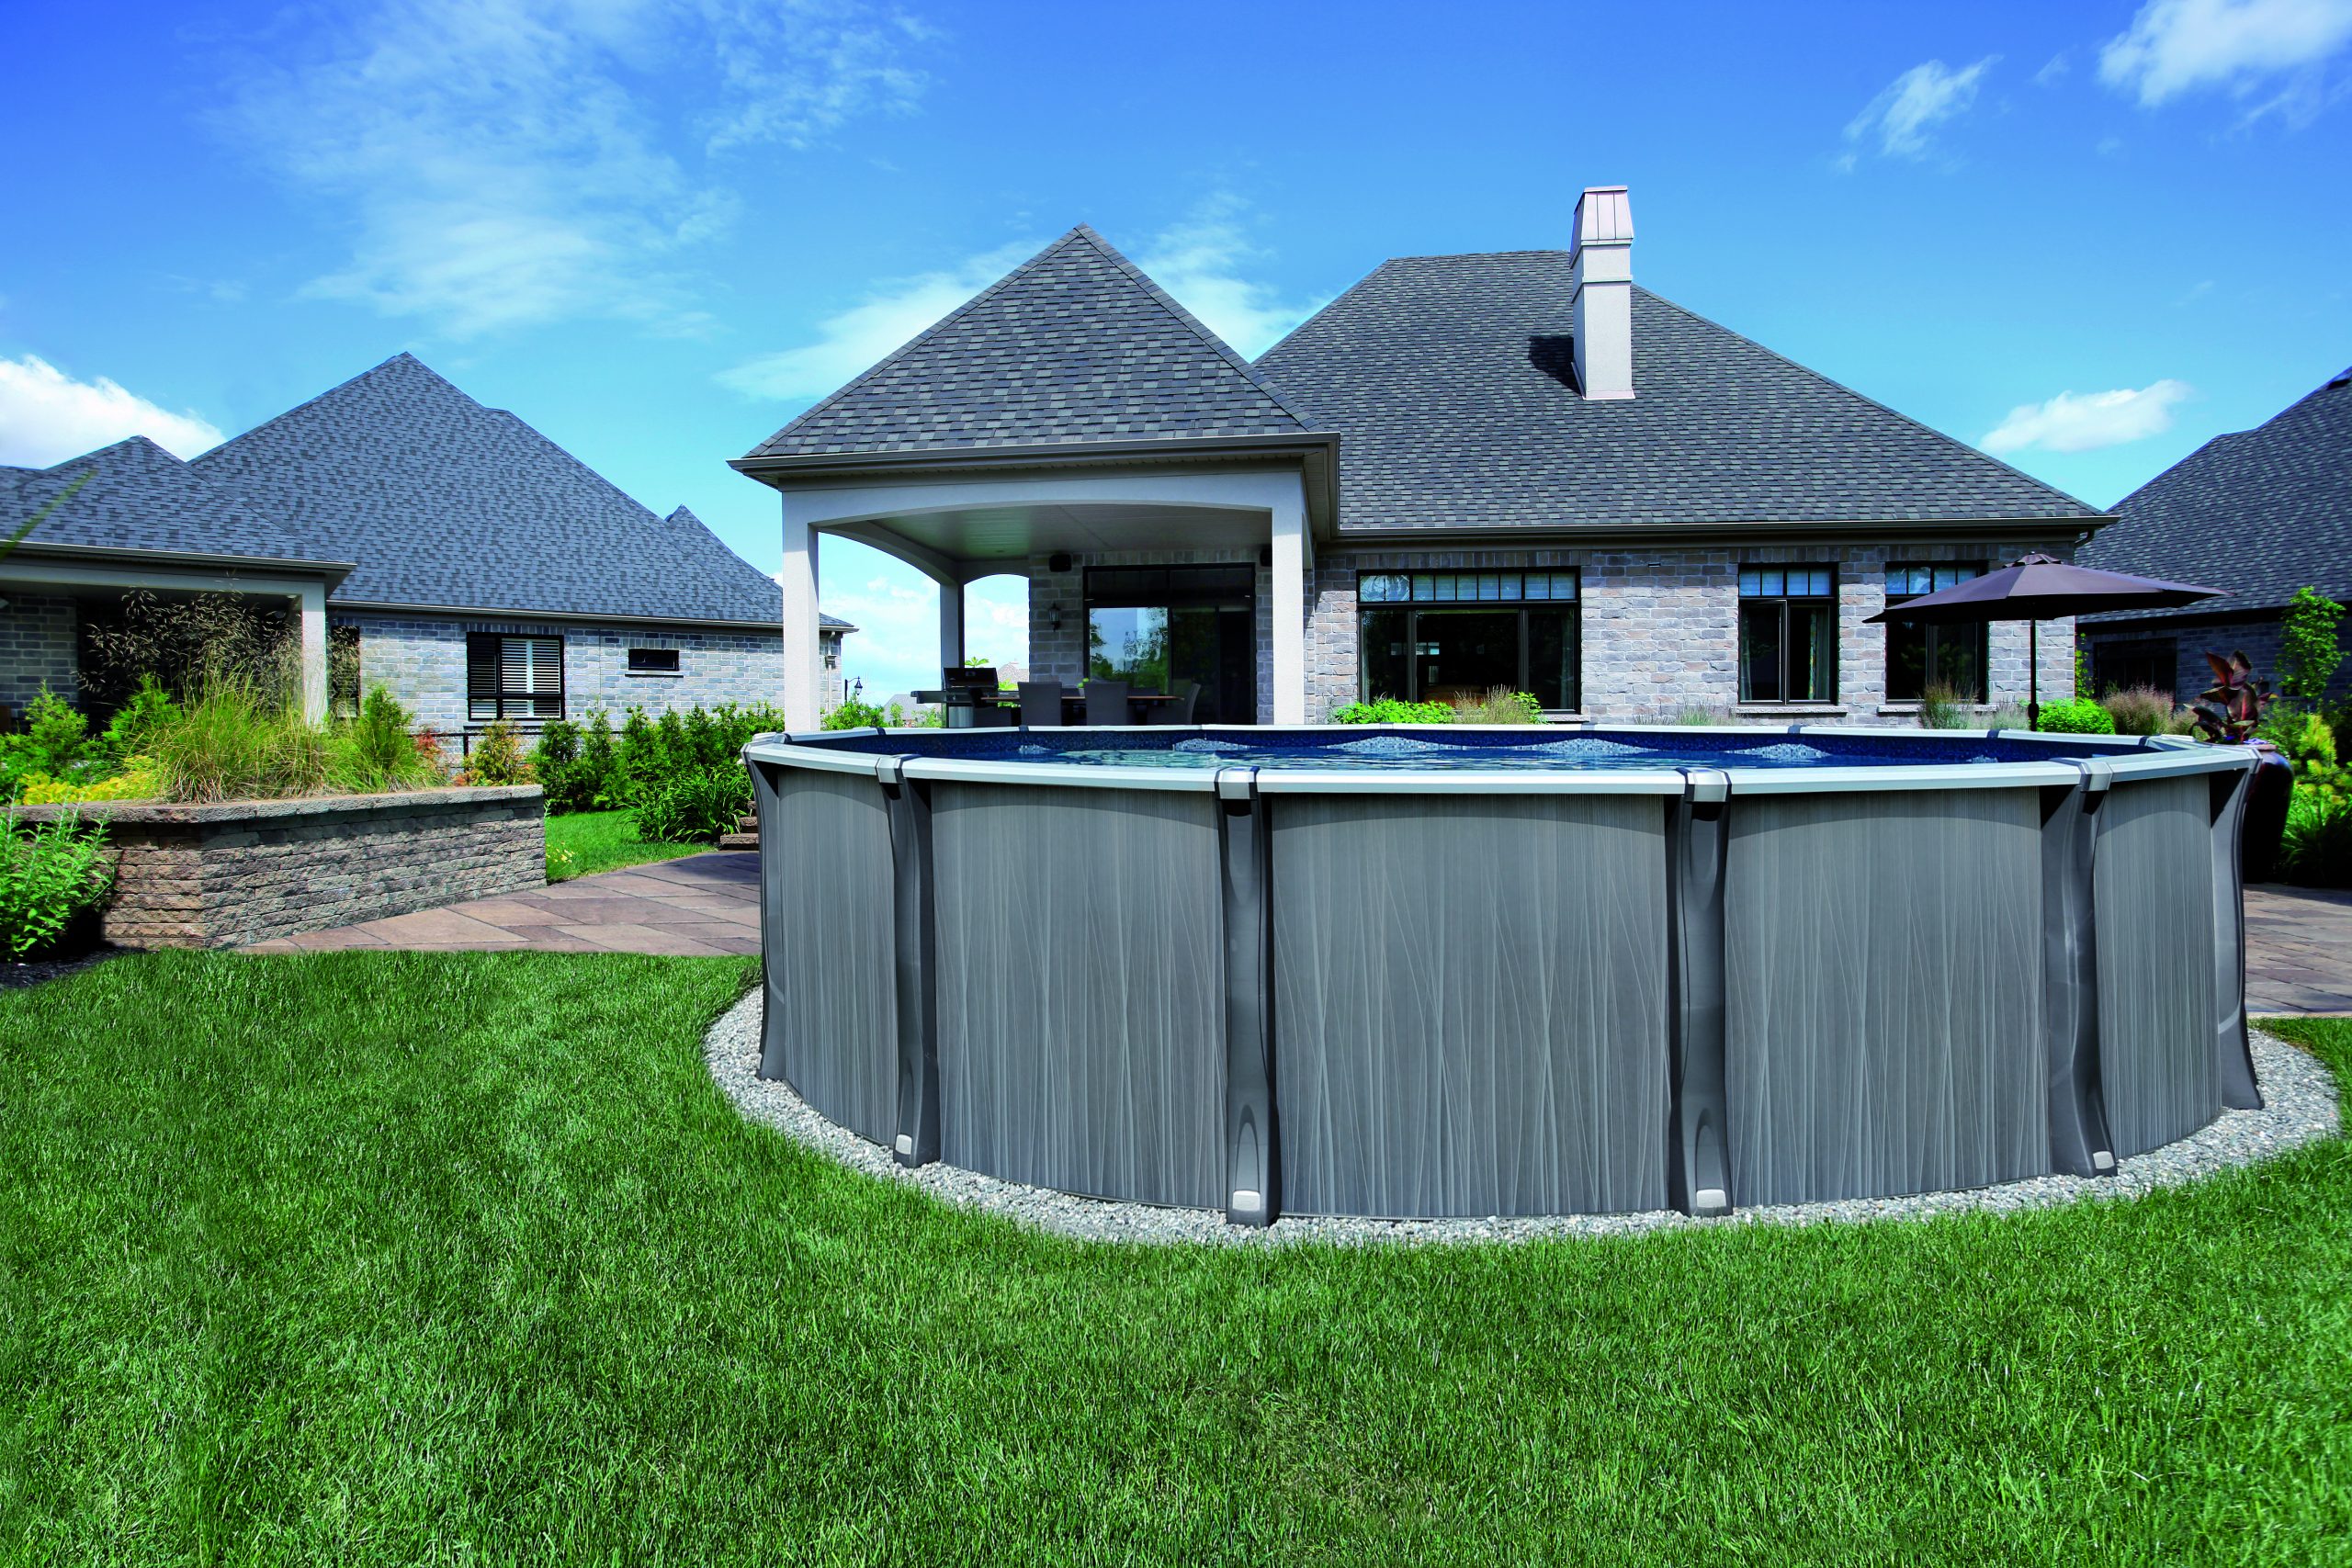 The Best Energy-Efficient Options to Heat Your Above Ground Pool